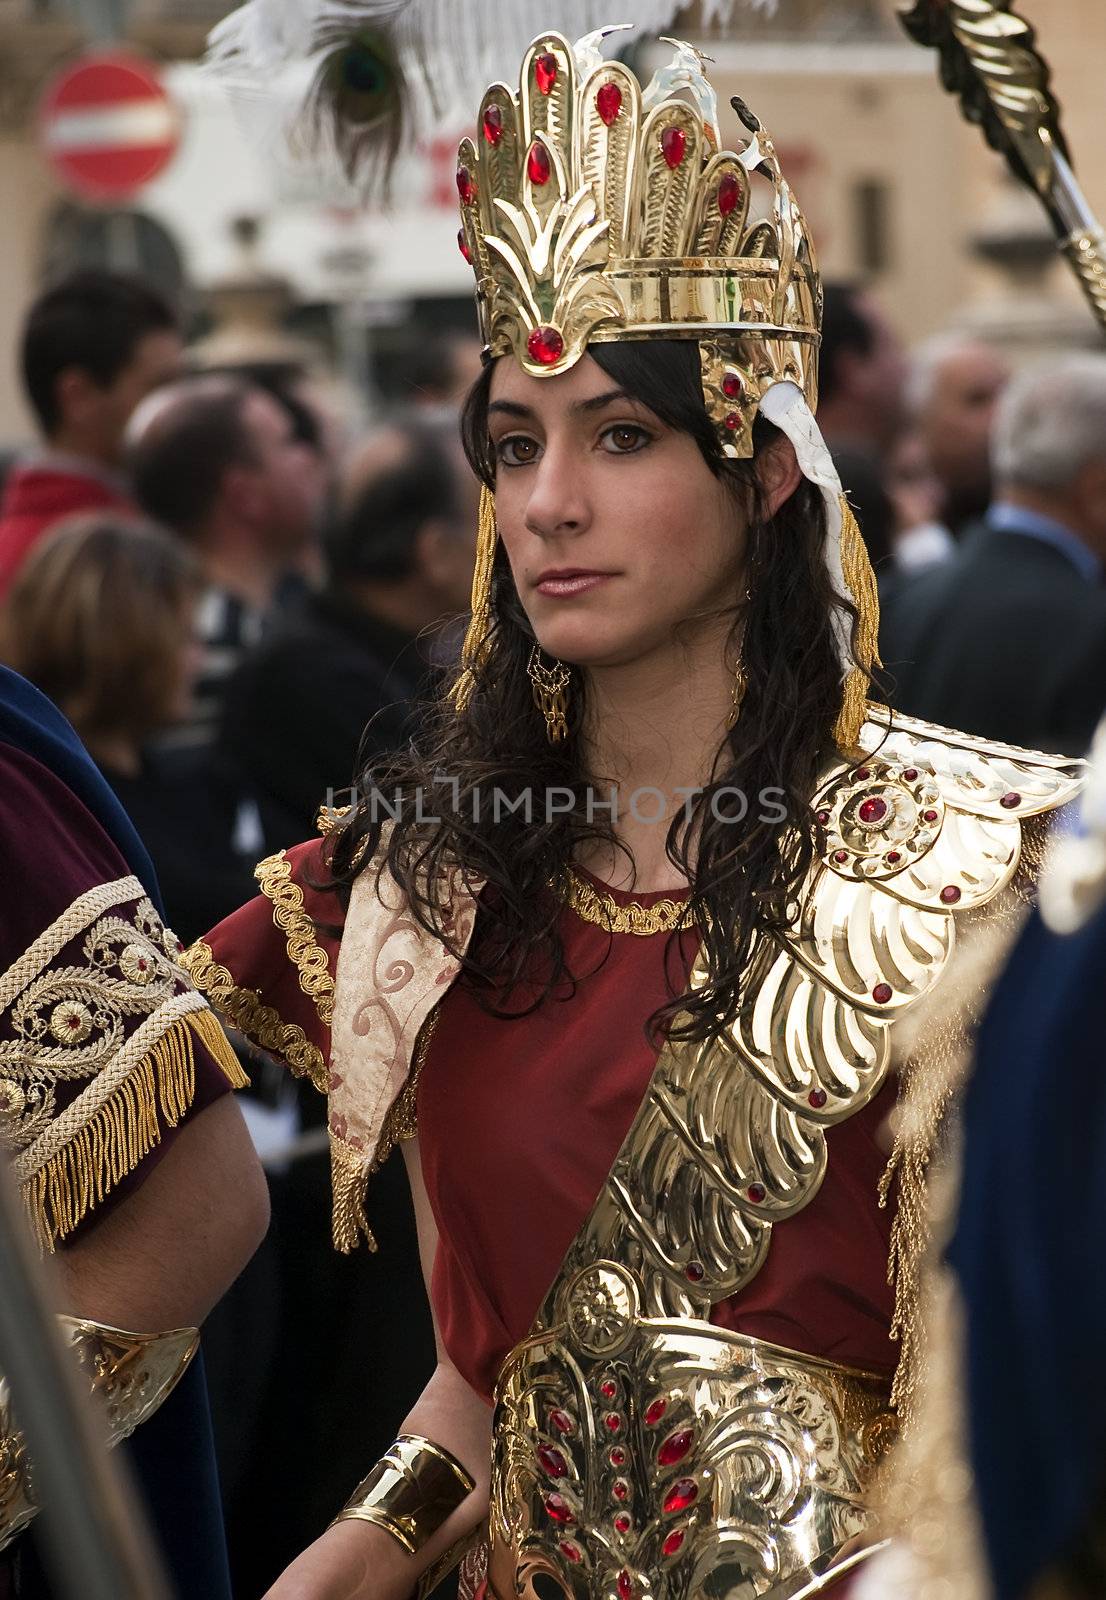 LUQA, MALTA - Friday 10th April 2009 - Persian Queen during the Good Friday procession in Malta